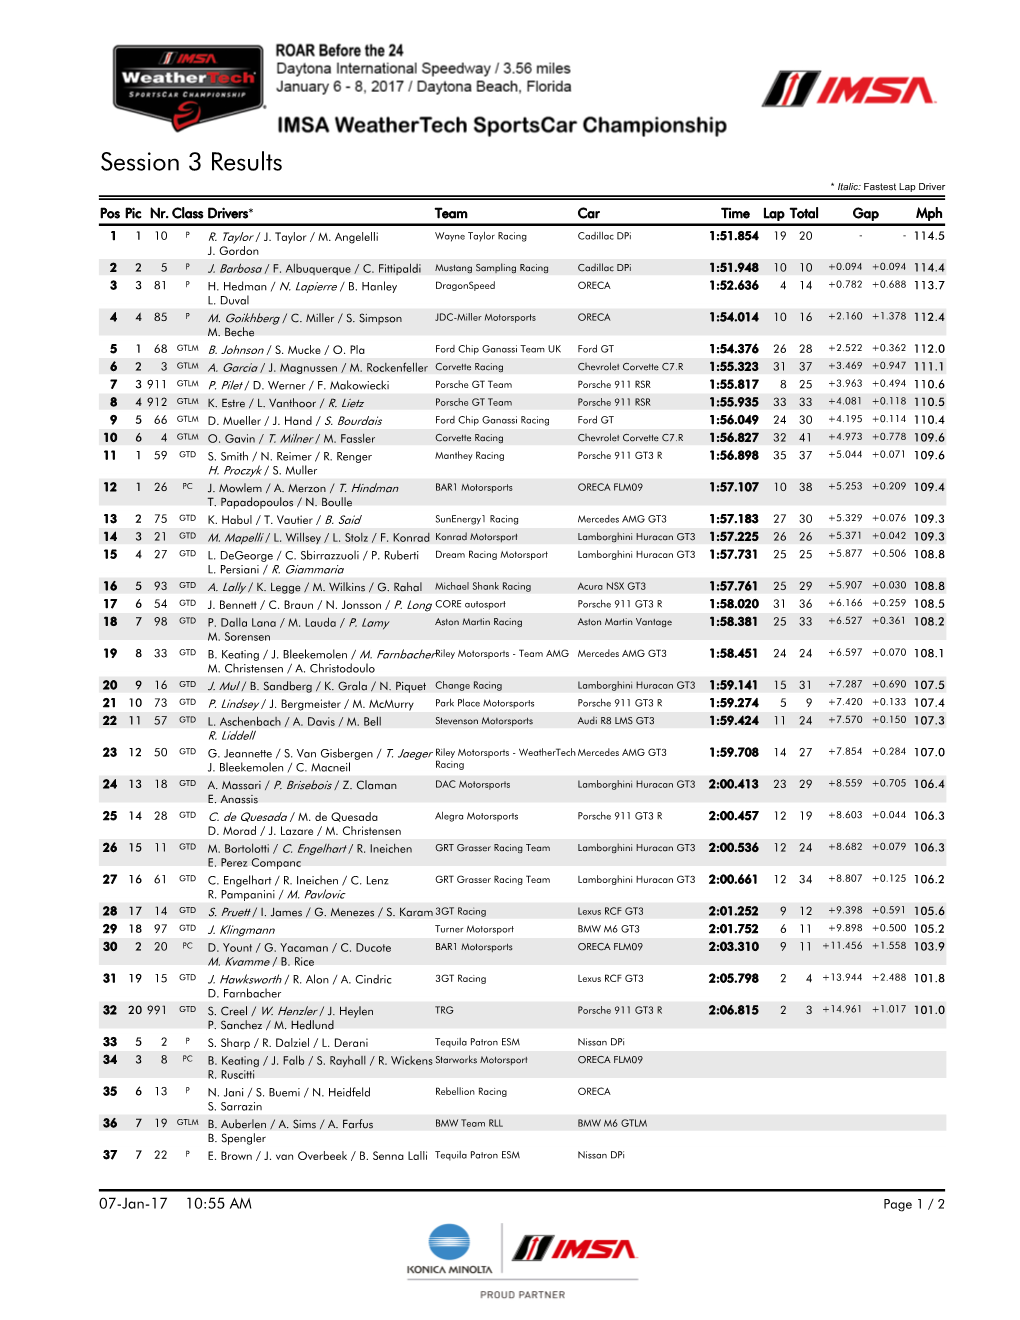 Session 3 Results * Italic: Fastest Lap Driver